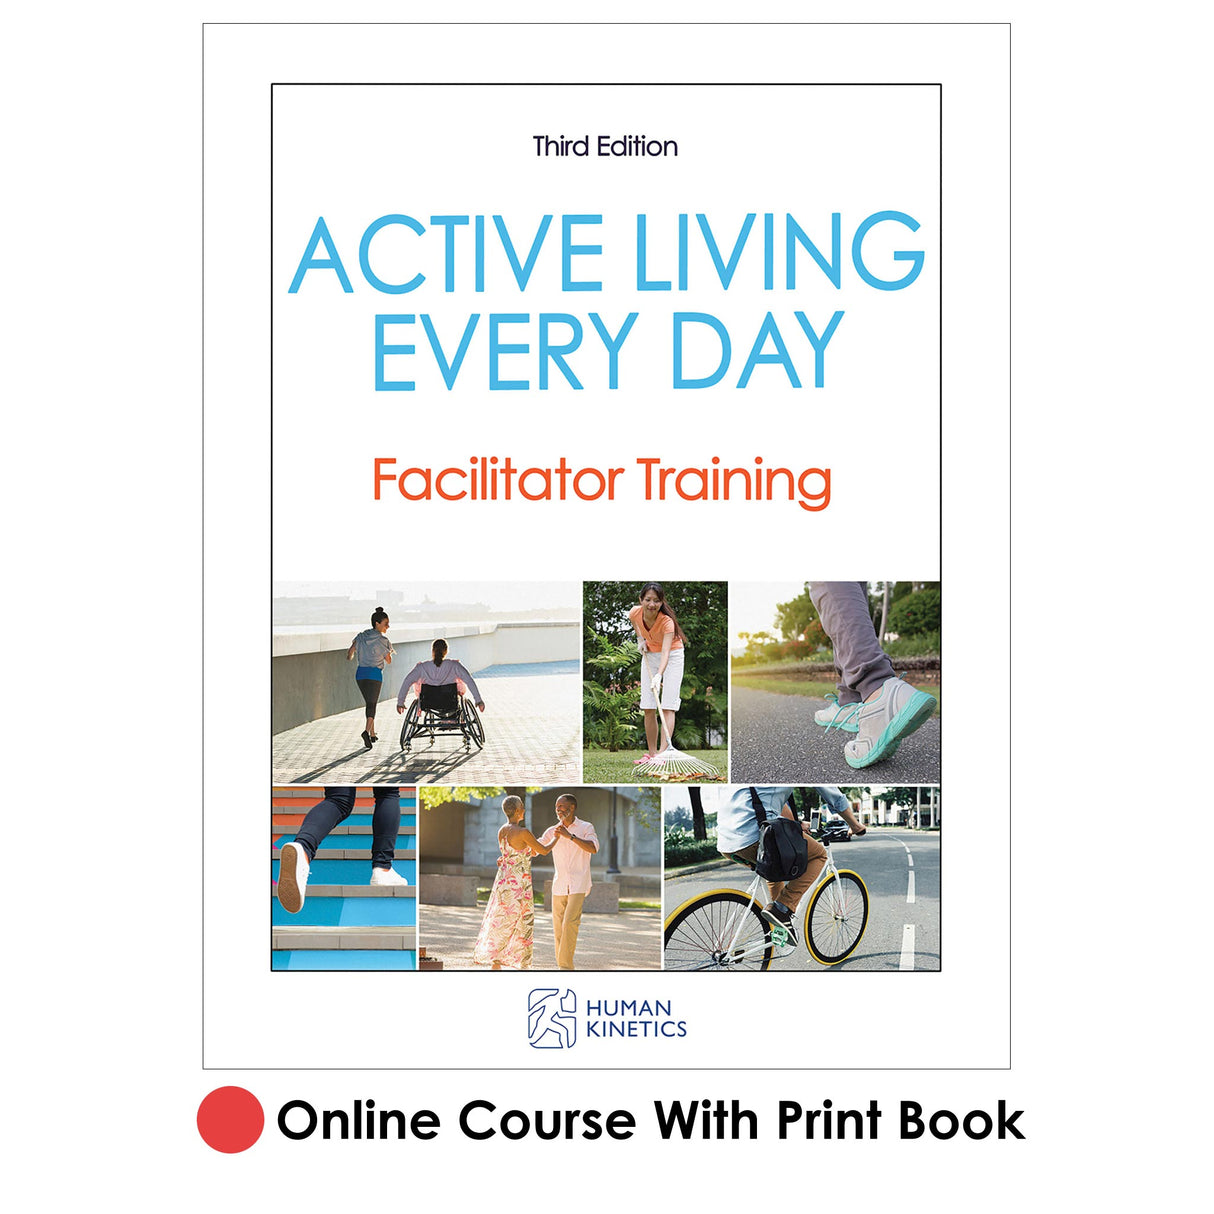 Active Living Every Day 3rd Edition Online Facilitator Training/CE Course With Print Book